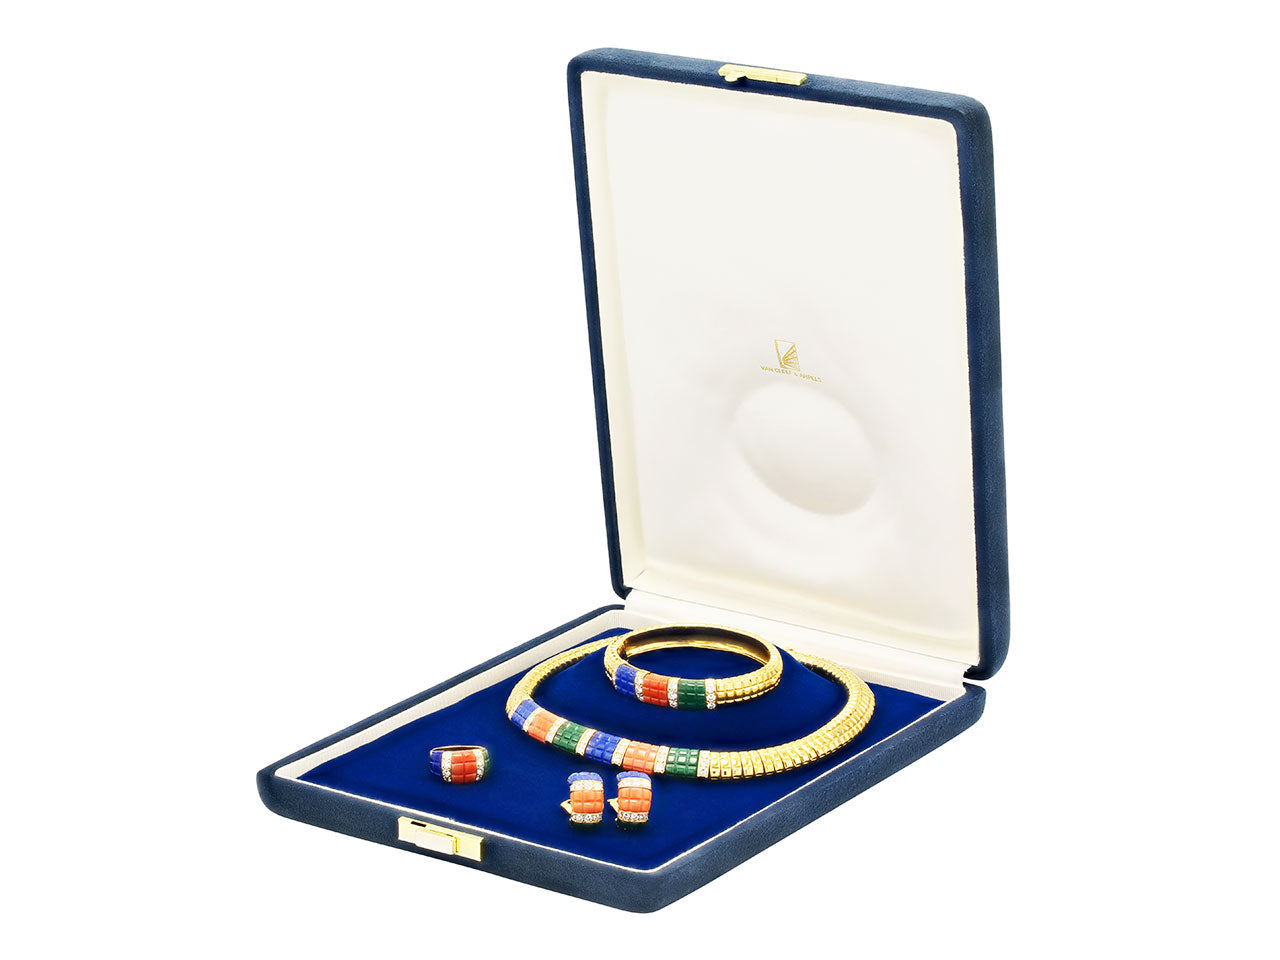 Van Cleef & Arpels Suite of Coral, Lapis, Malachite and Diamond and 18K Jewelry